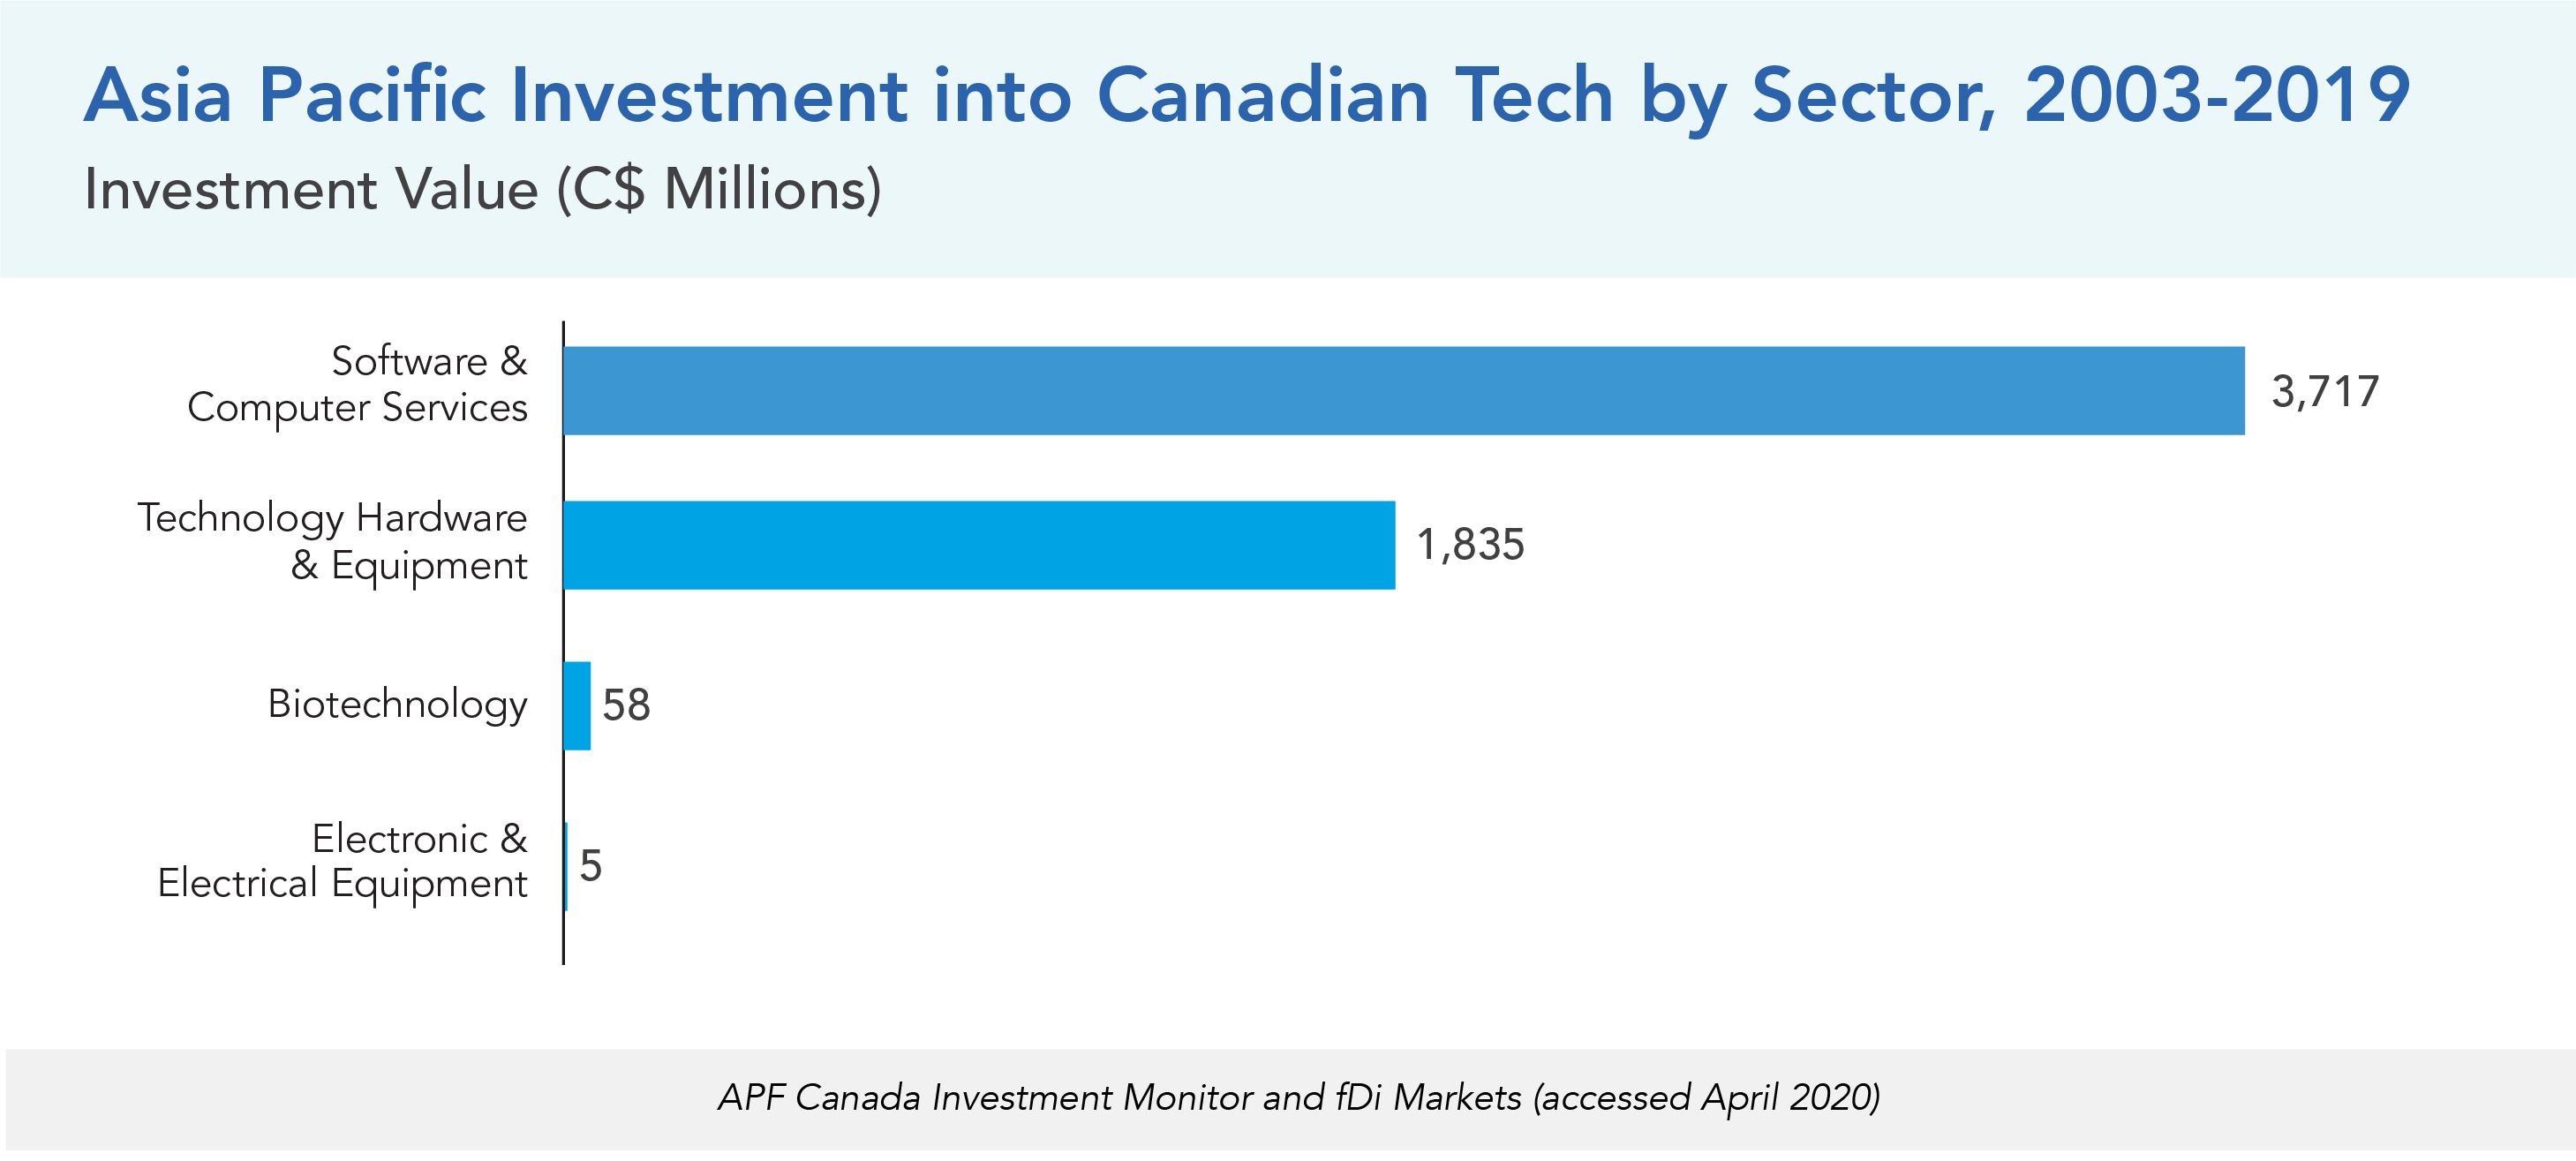 Asia Pacific Investment into Canadian Tech by Sector, 2003-2019